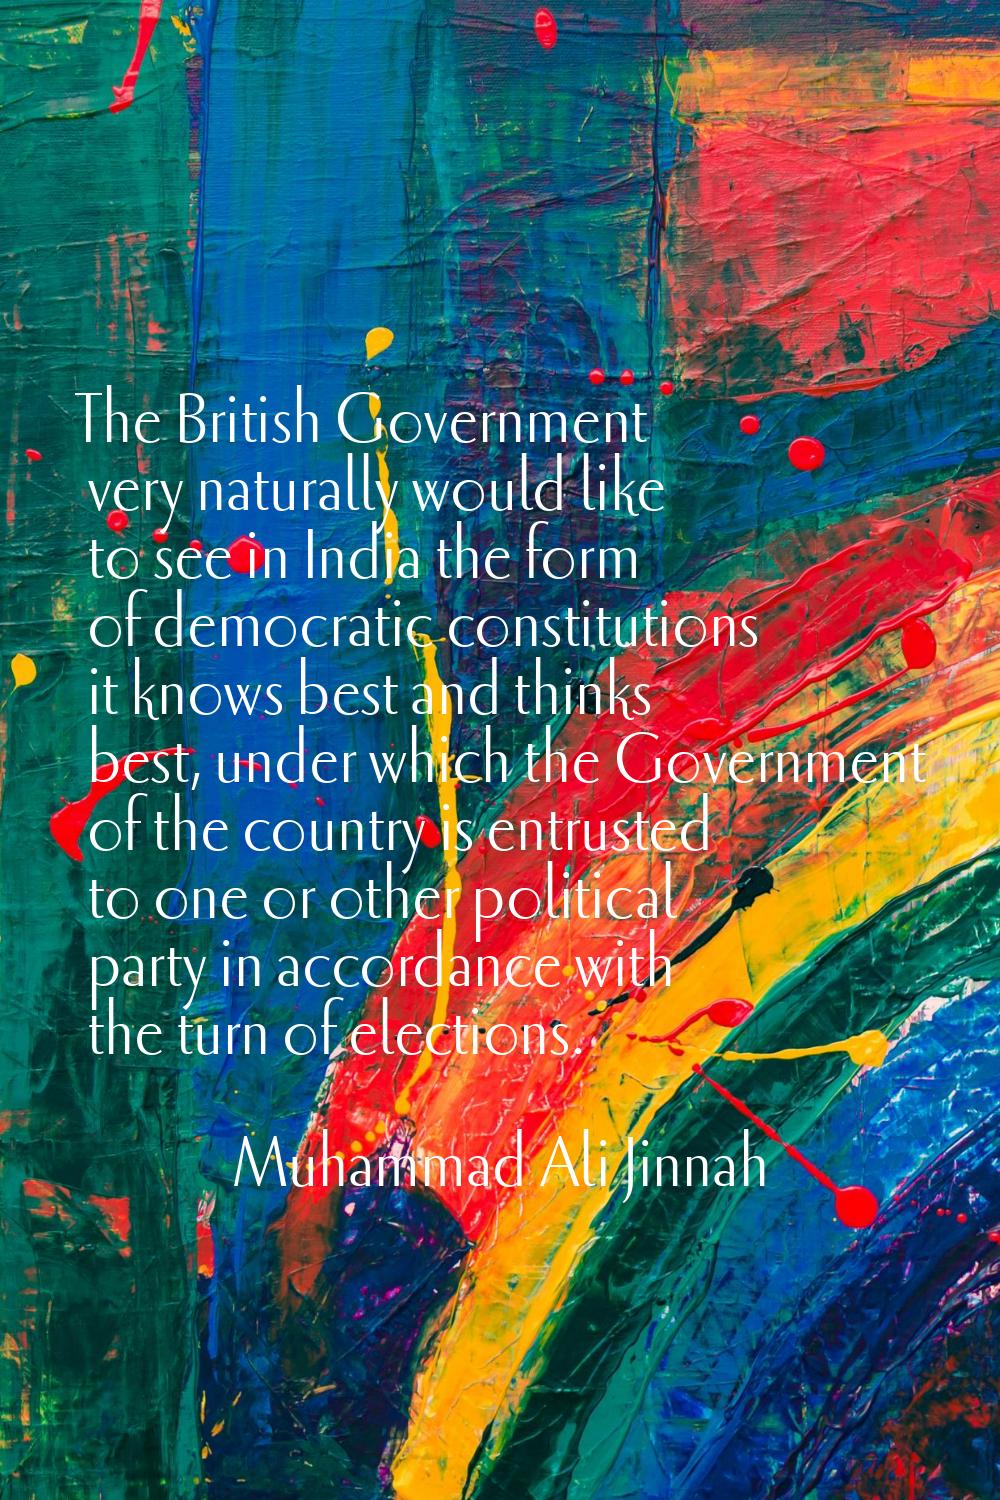 The British Government very naturally would like to see in India the form of democratic constitutio